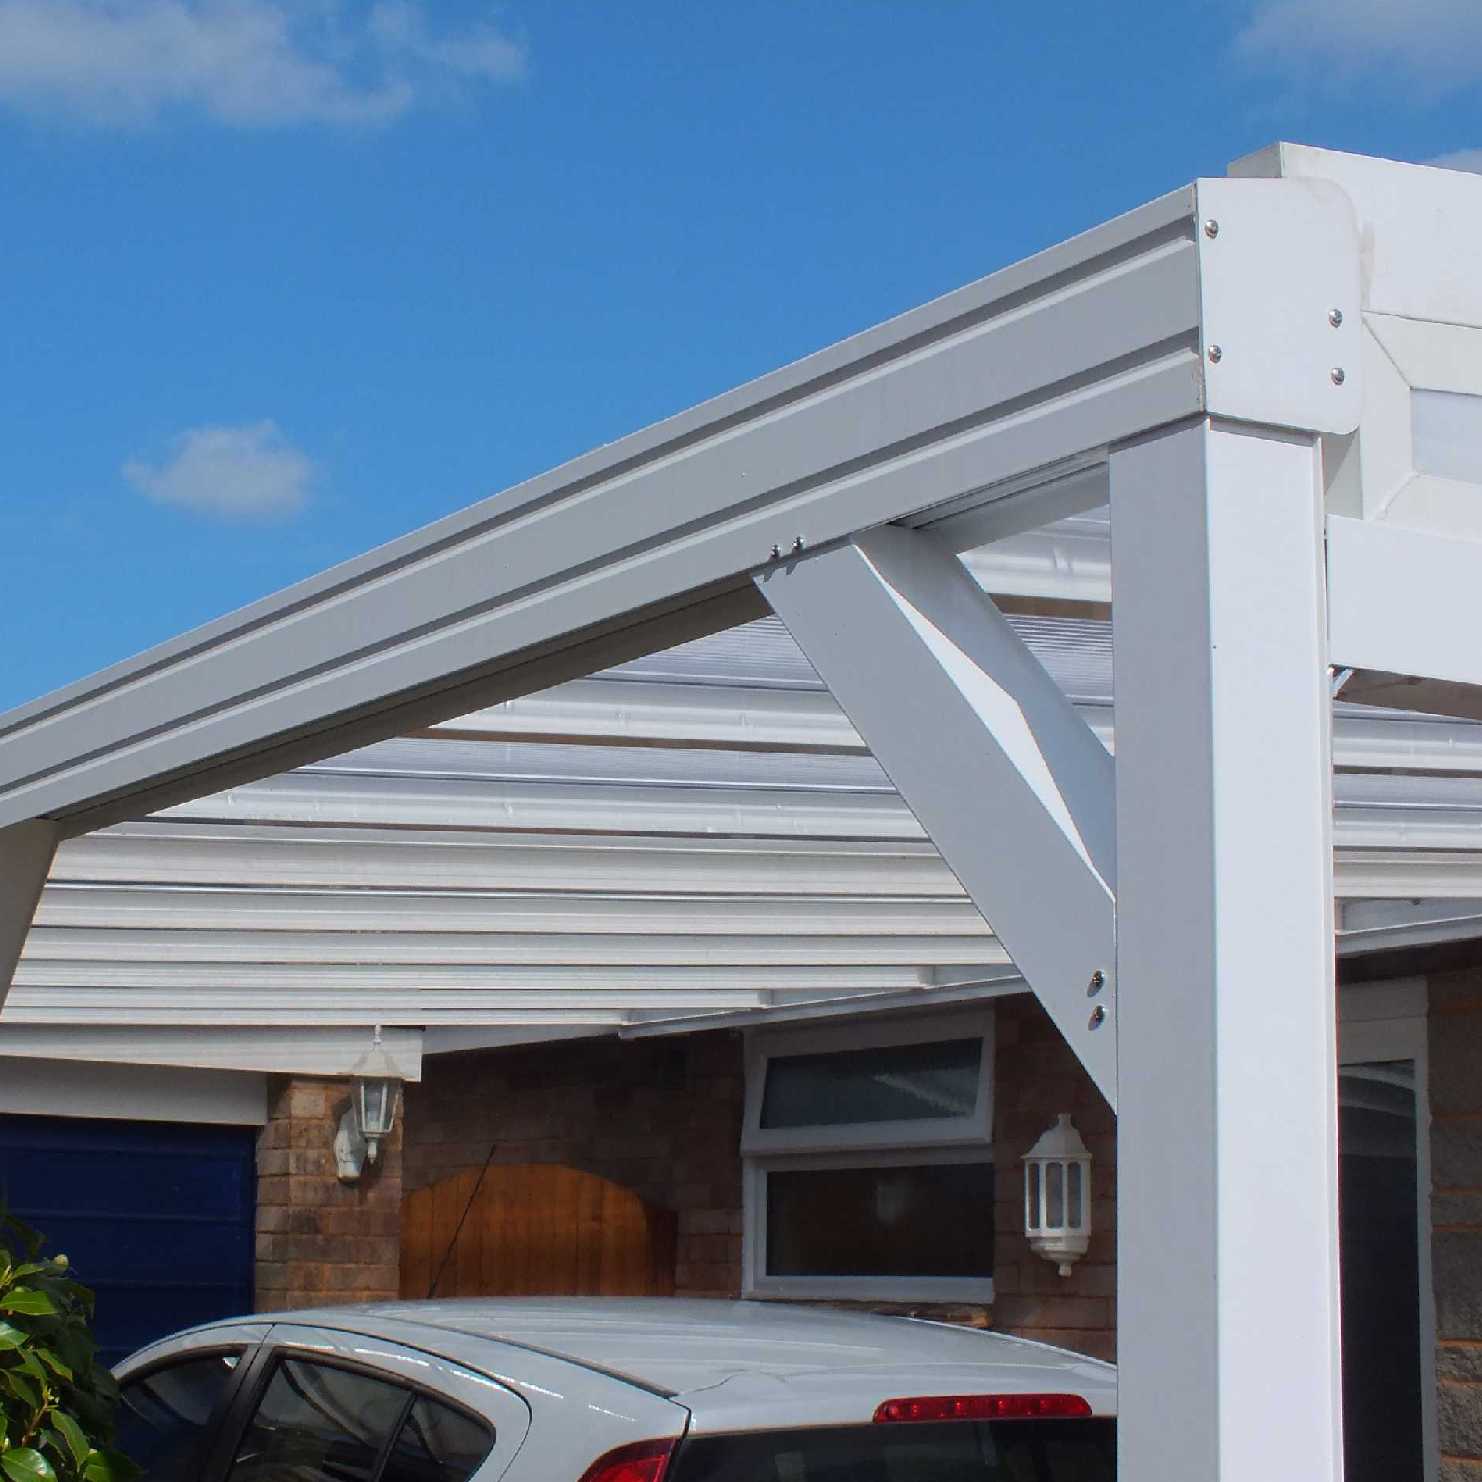 Great deals on Omega Smart Lean-To Canopy, White with 16mm Polycarbonate Glazing - 6.3m (W) x 2.5m (P), (4) Supporting Posts